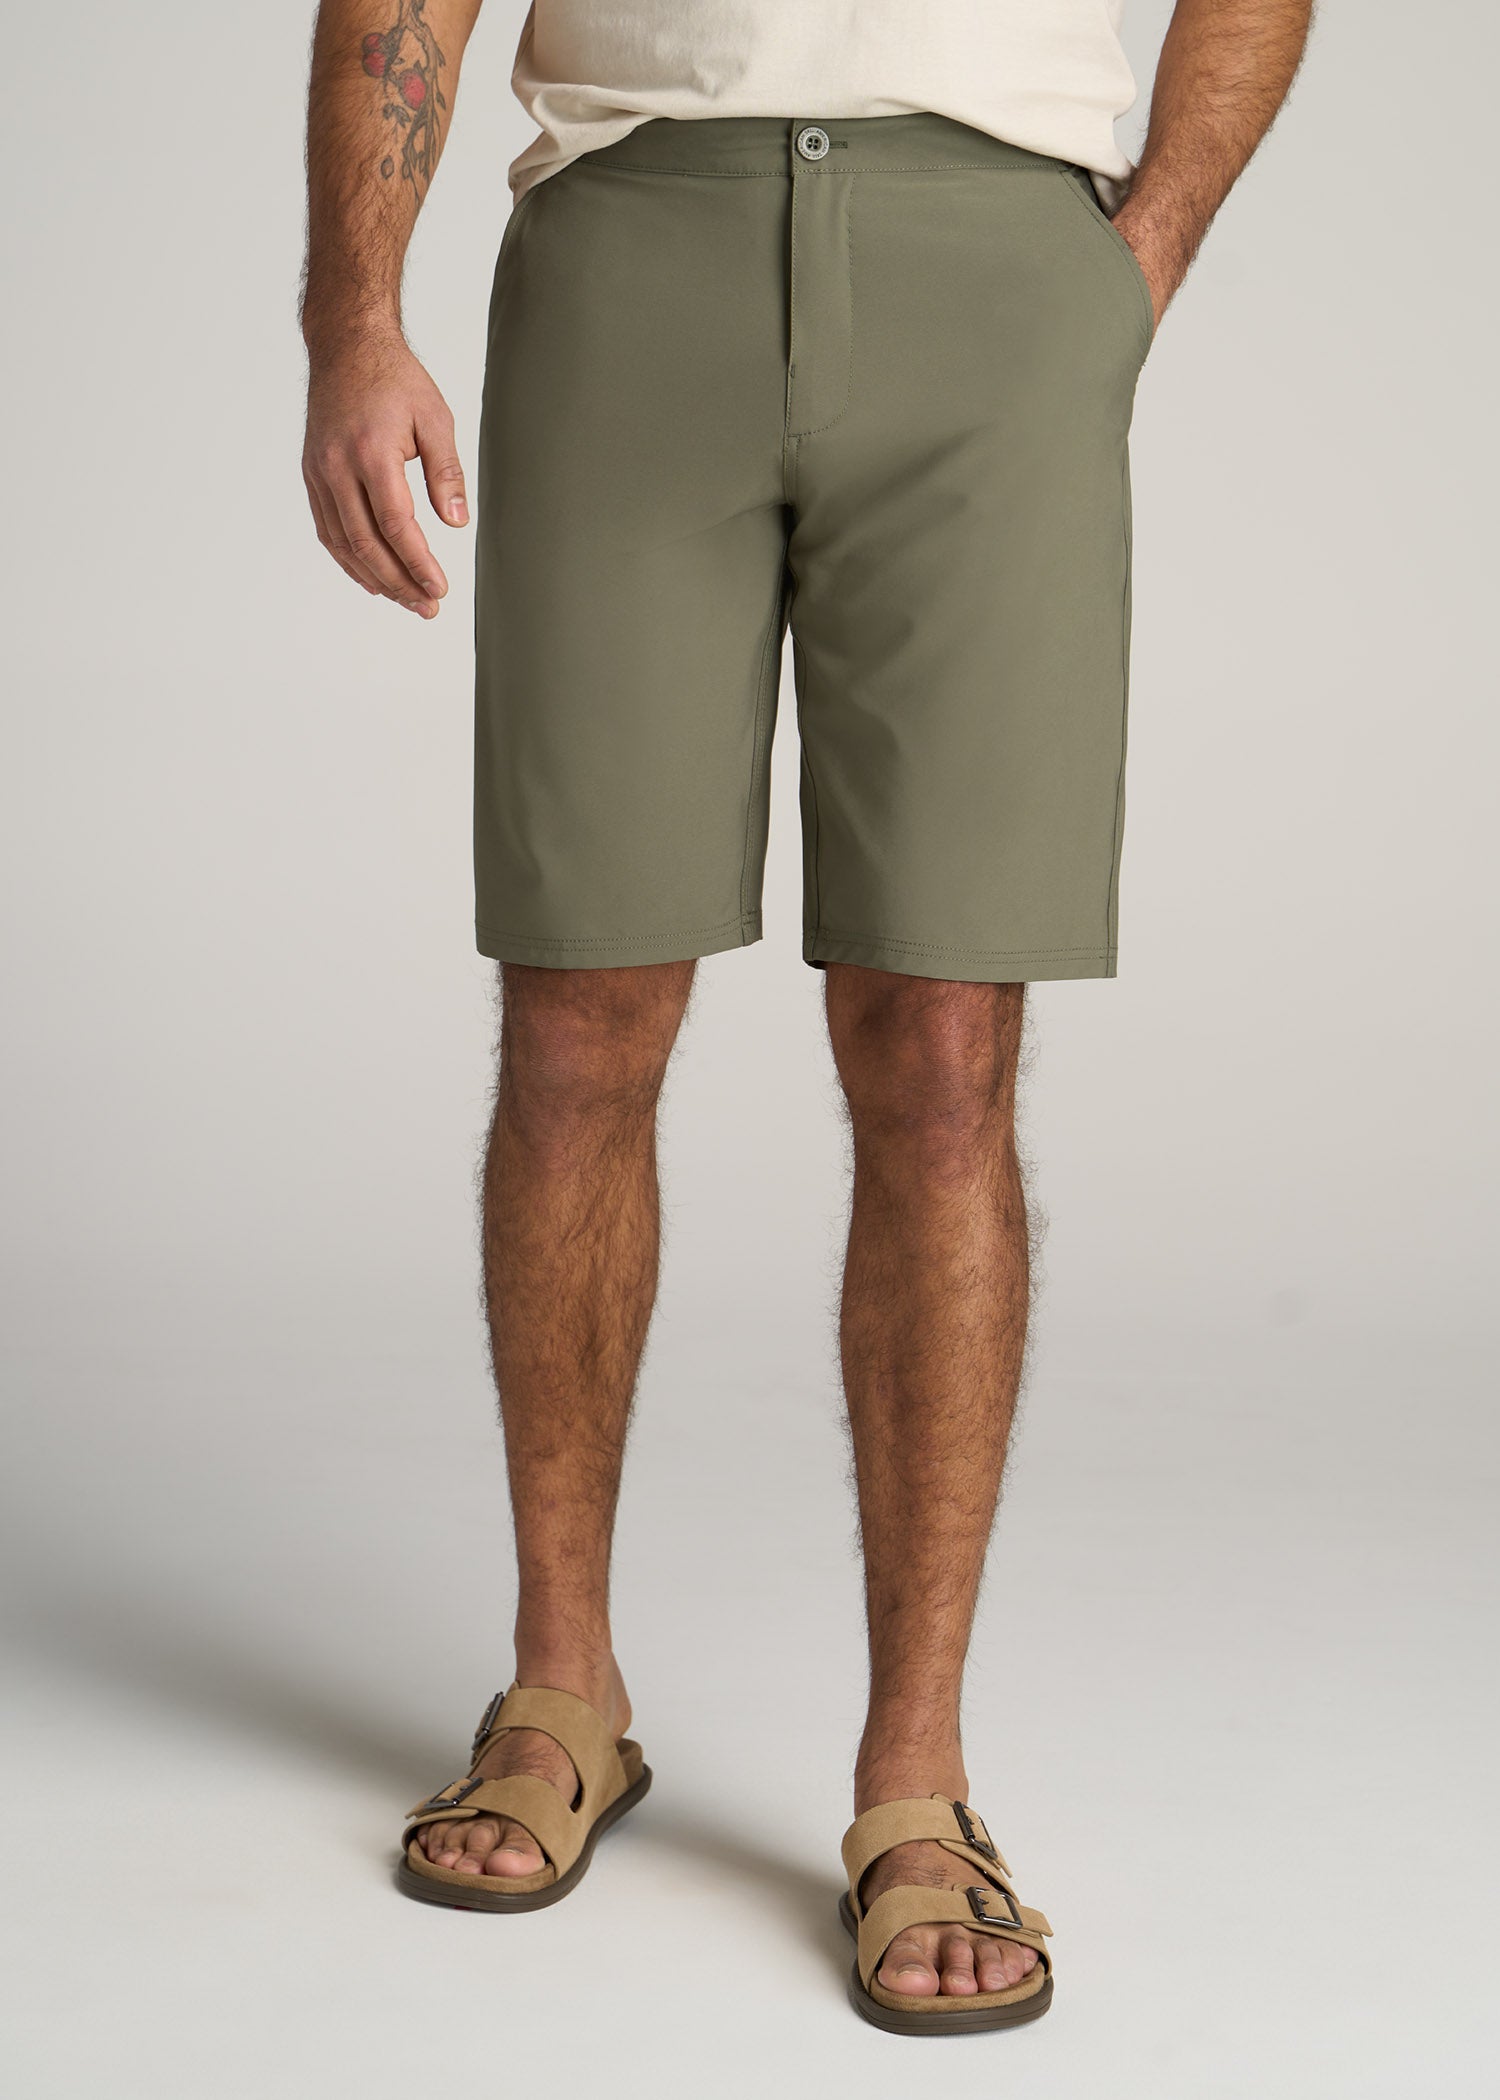 Men's Tall All-Day Shorts Olive